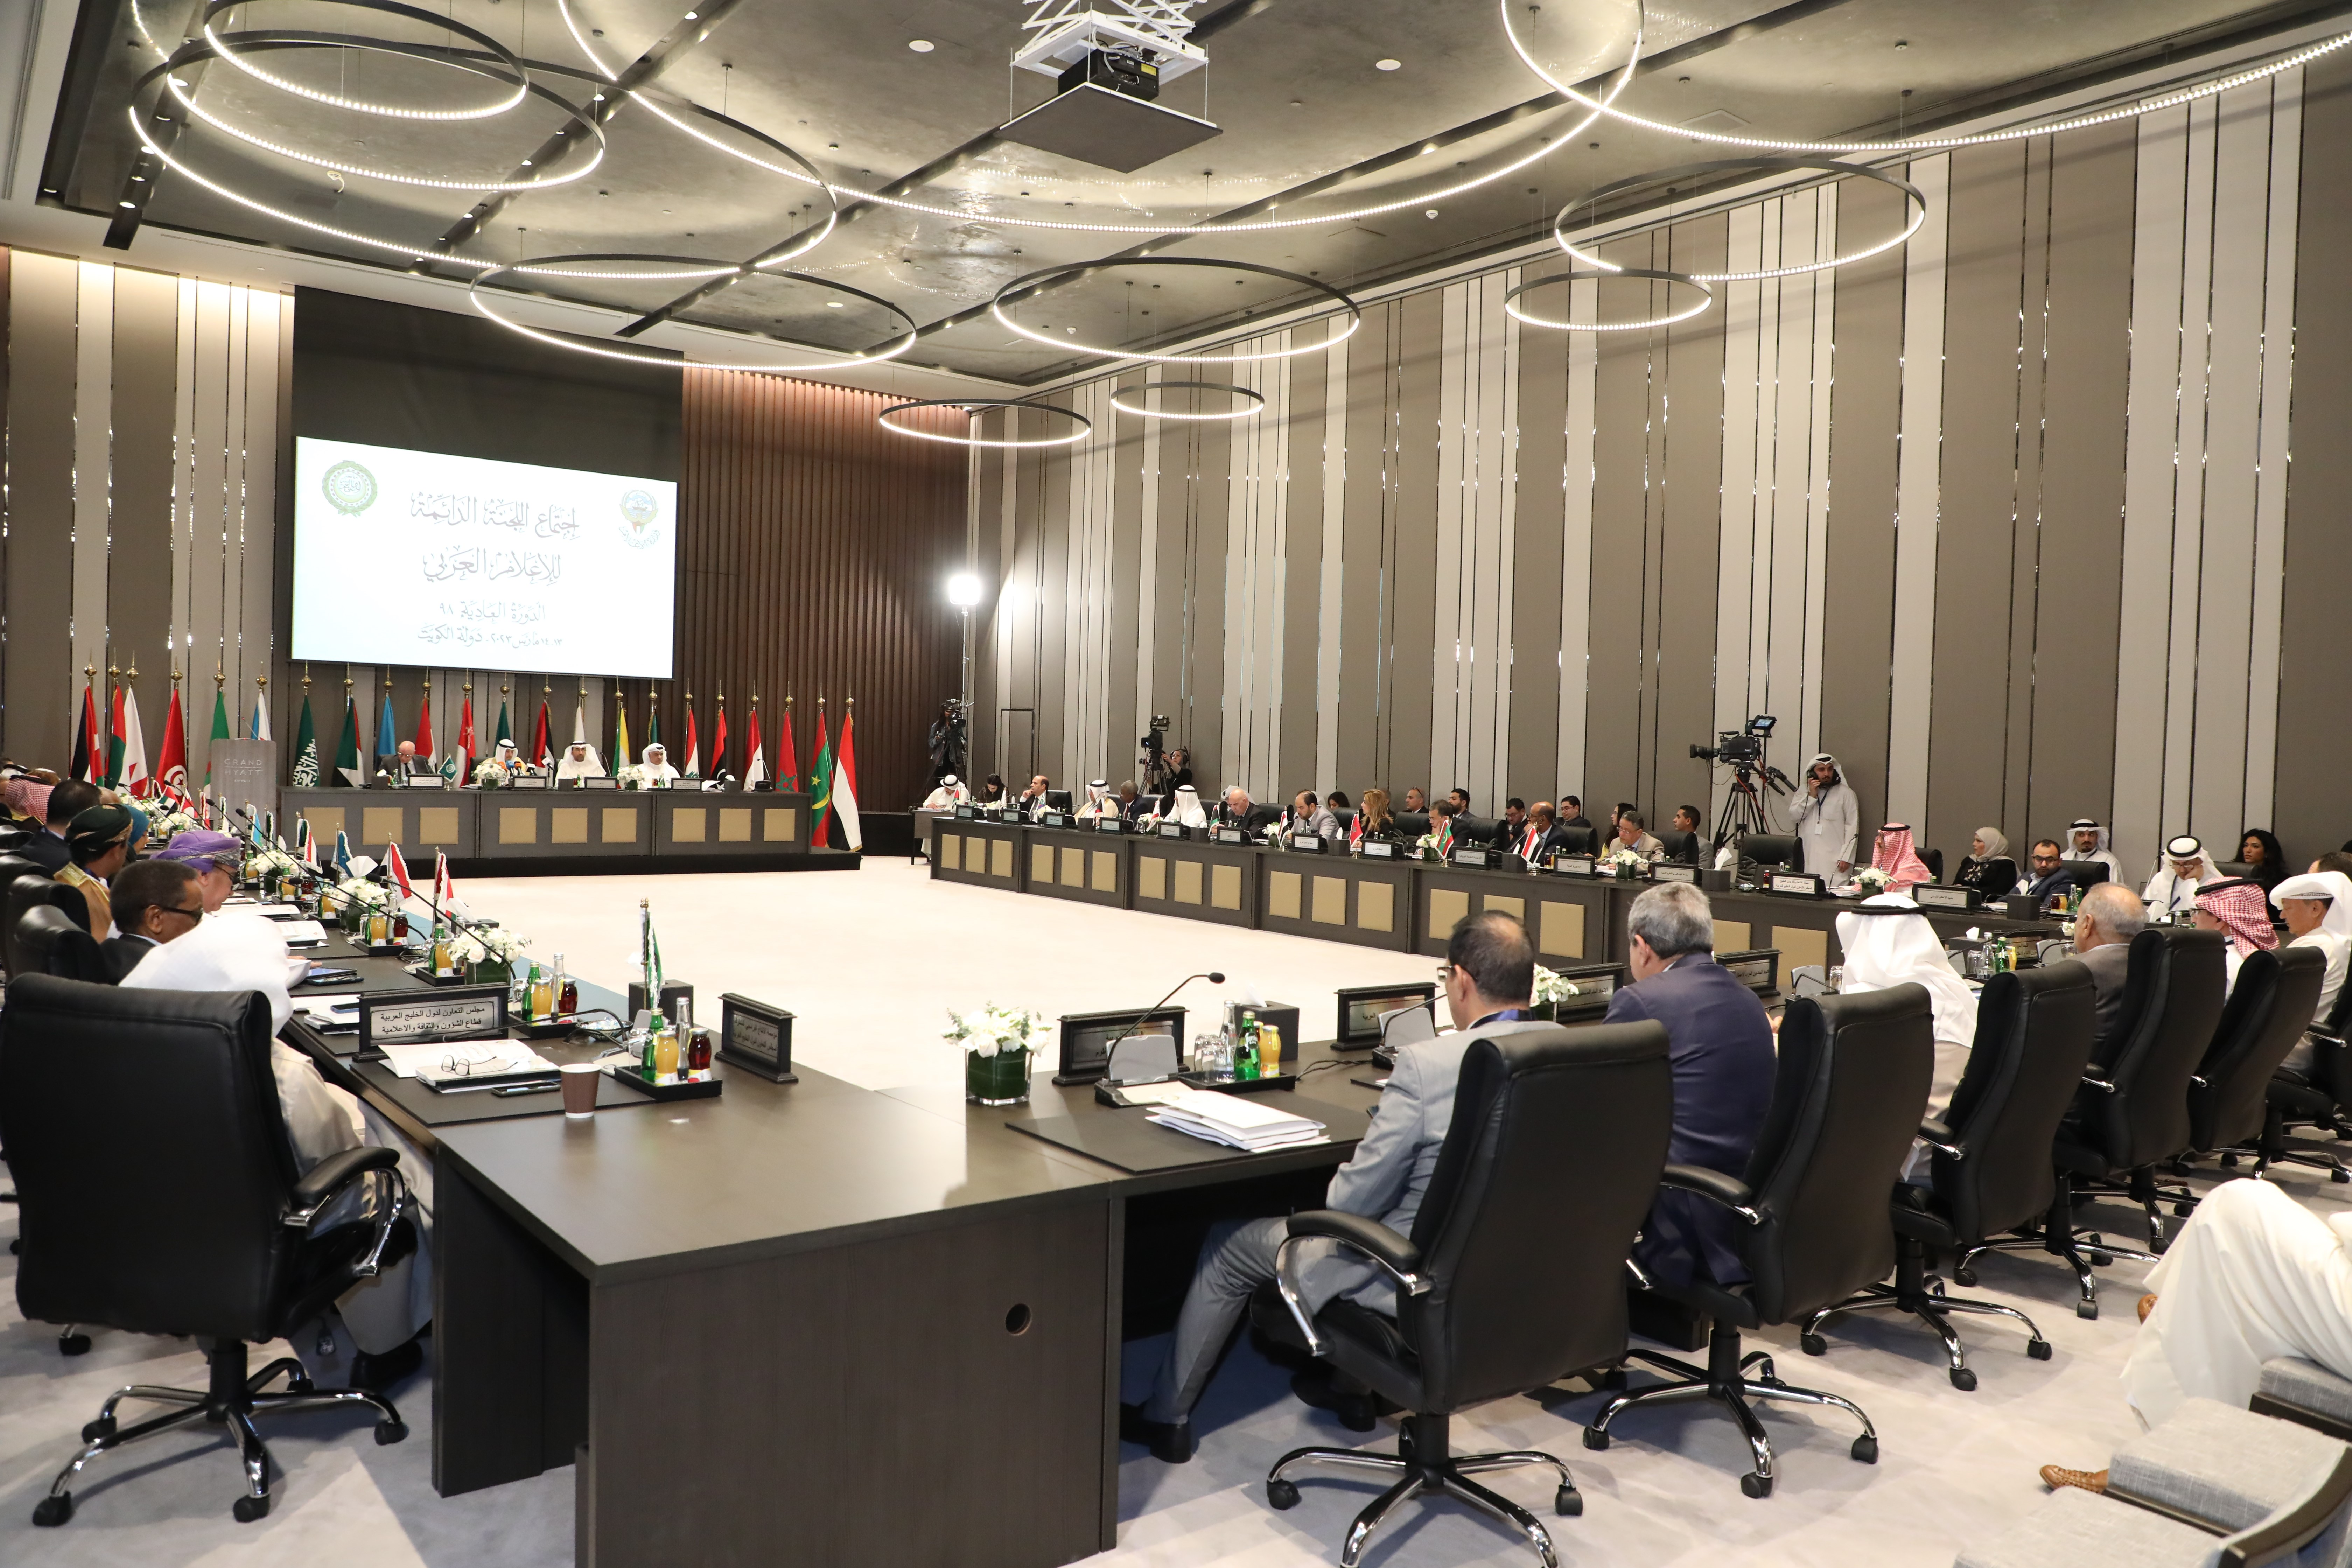 The Executive Office of Arab Information Ministers' Council meets